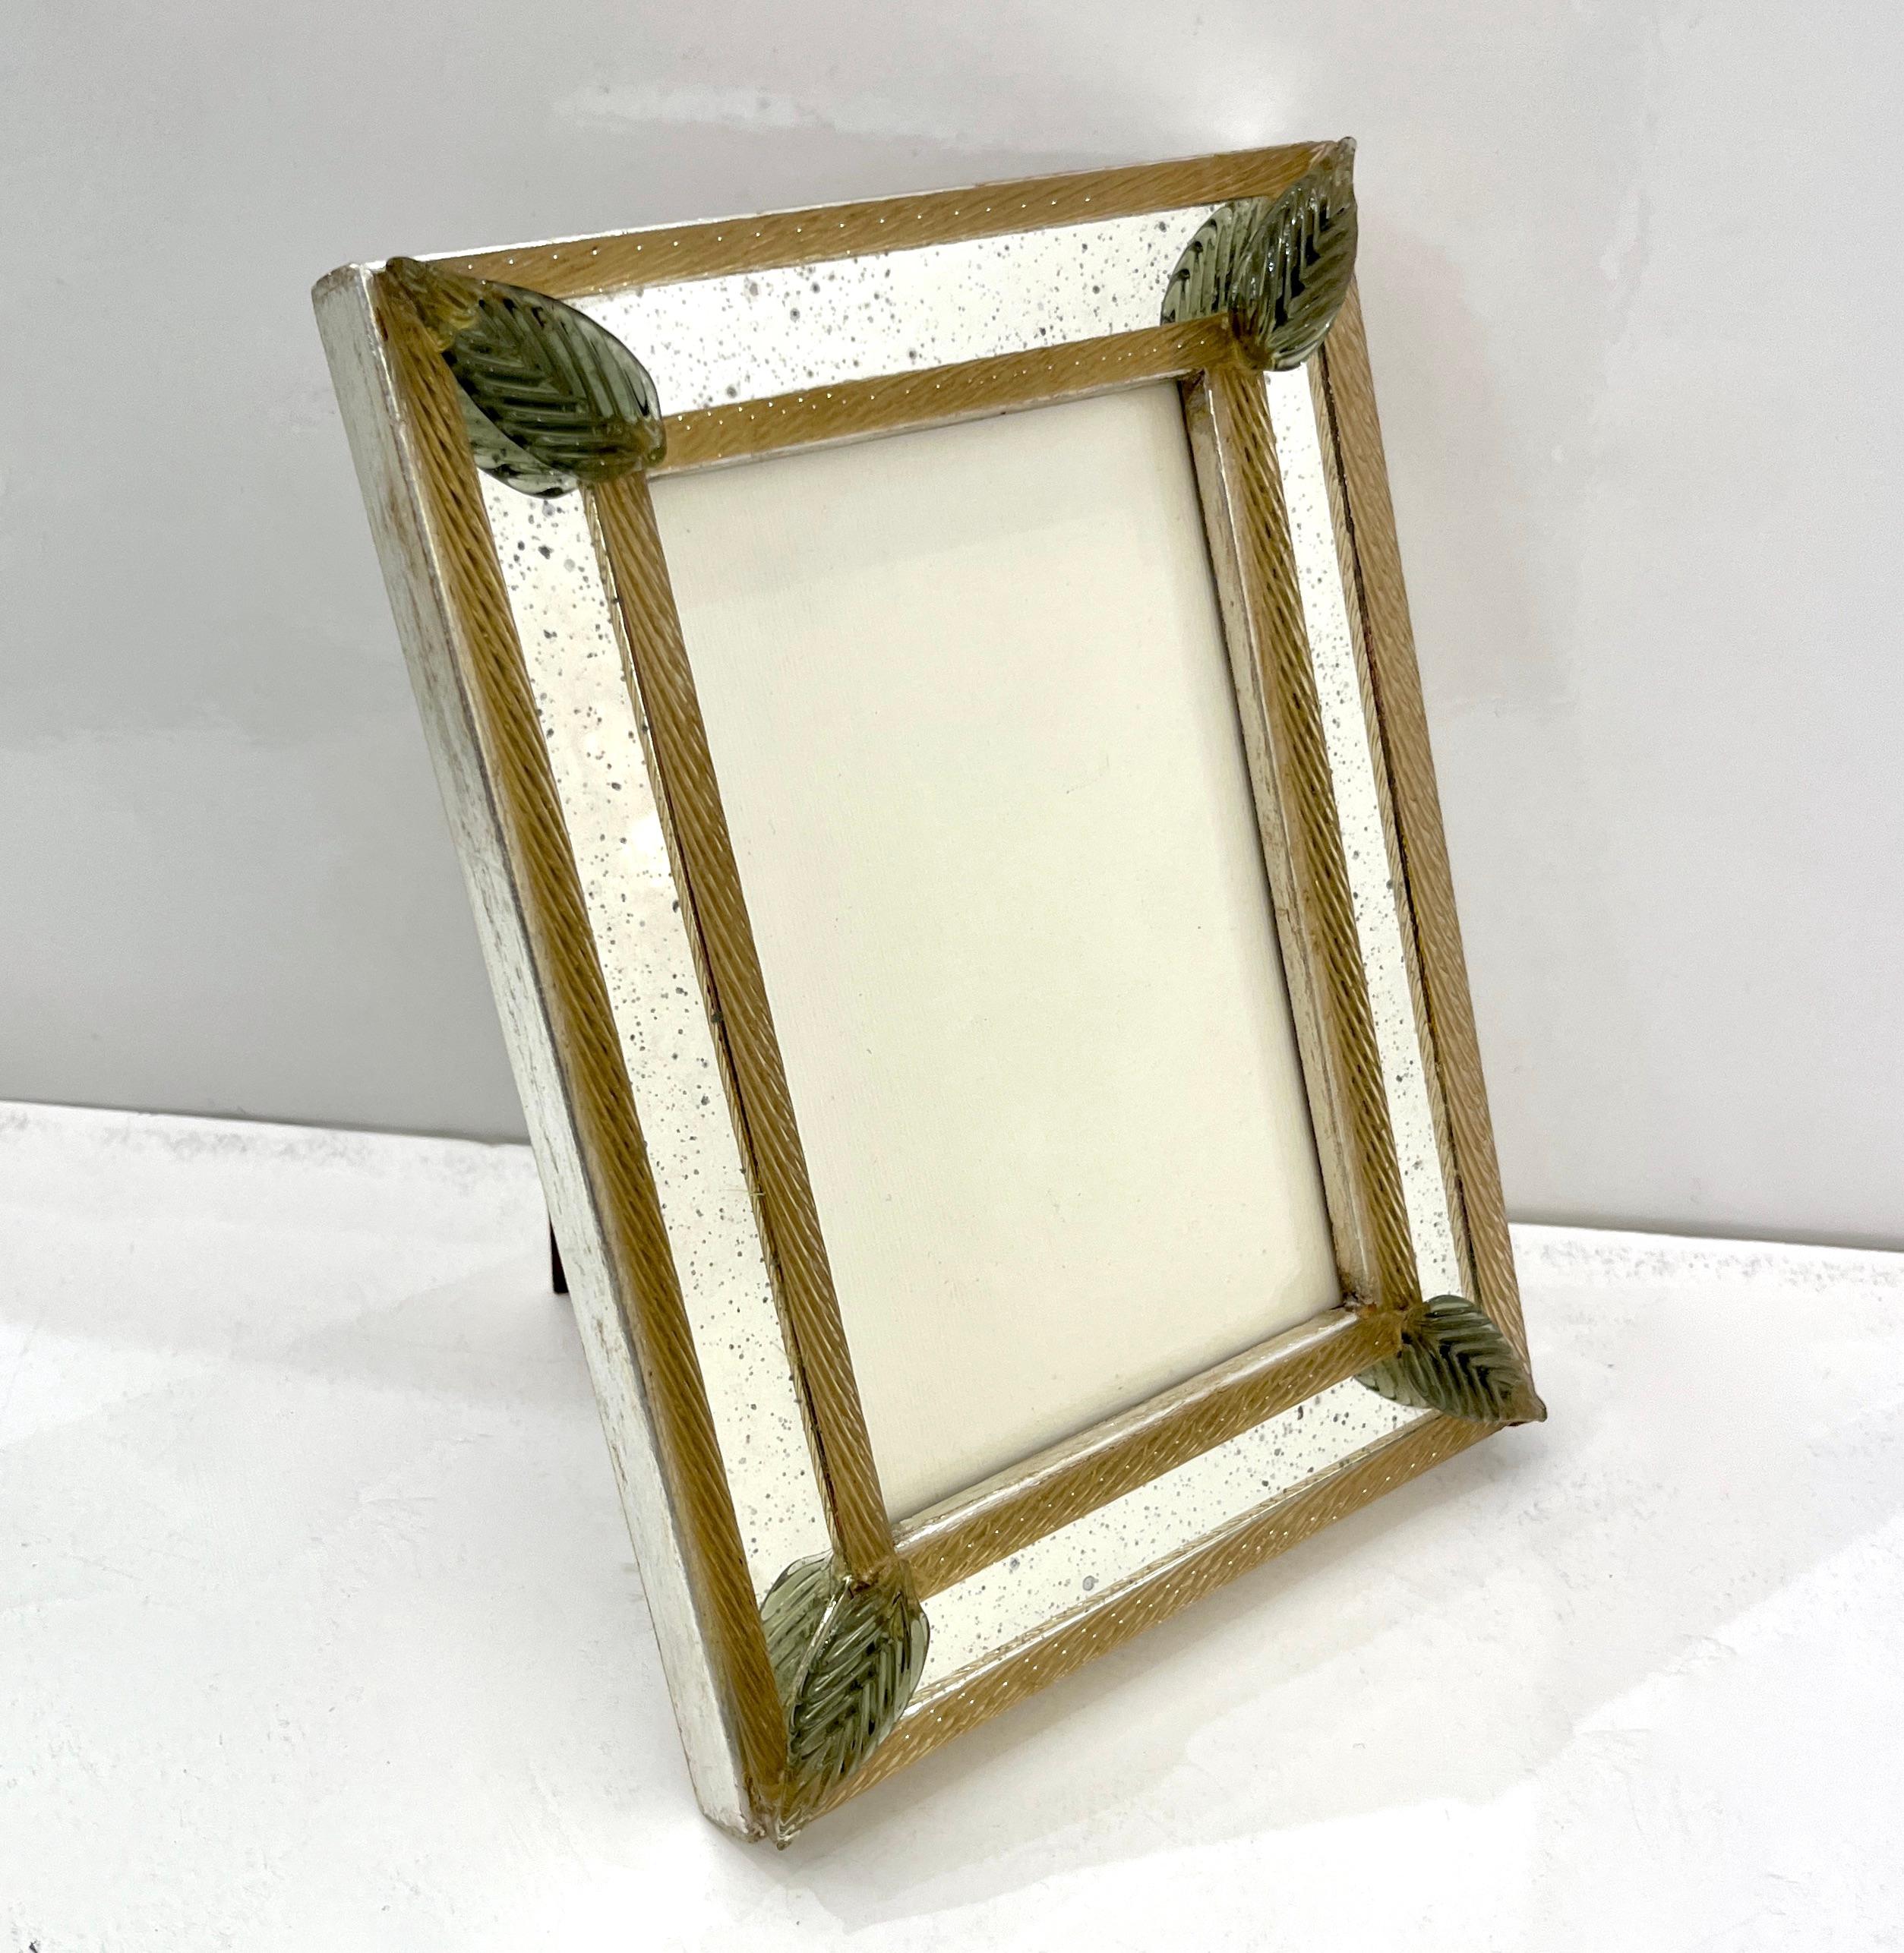 A 1960s elegant vintage organic picture frame to add style and simple sophistication to any room. The vintage speckled mirrored frame is double-edged with twisted amber gold Murano glass baguettes and each corner is decorated with a hunter green